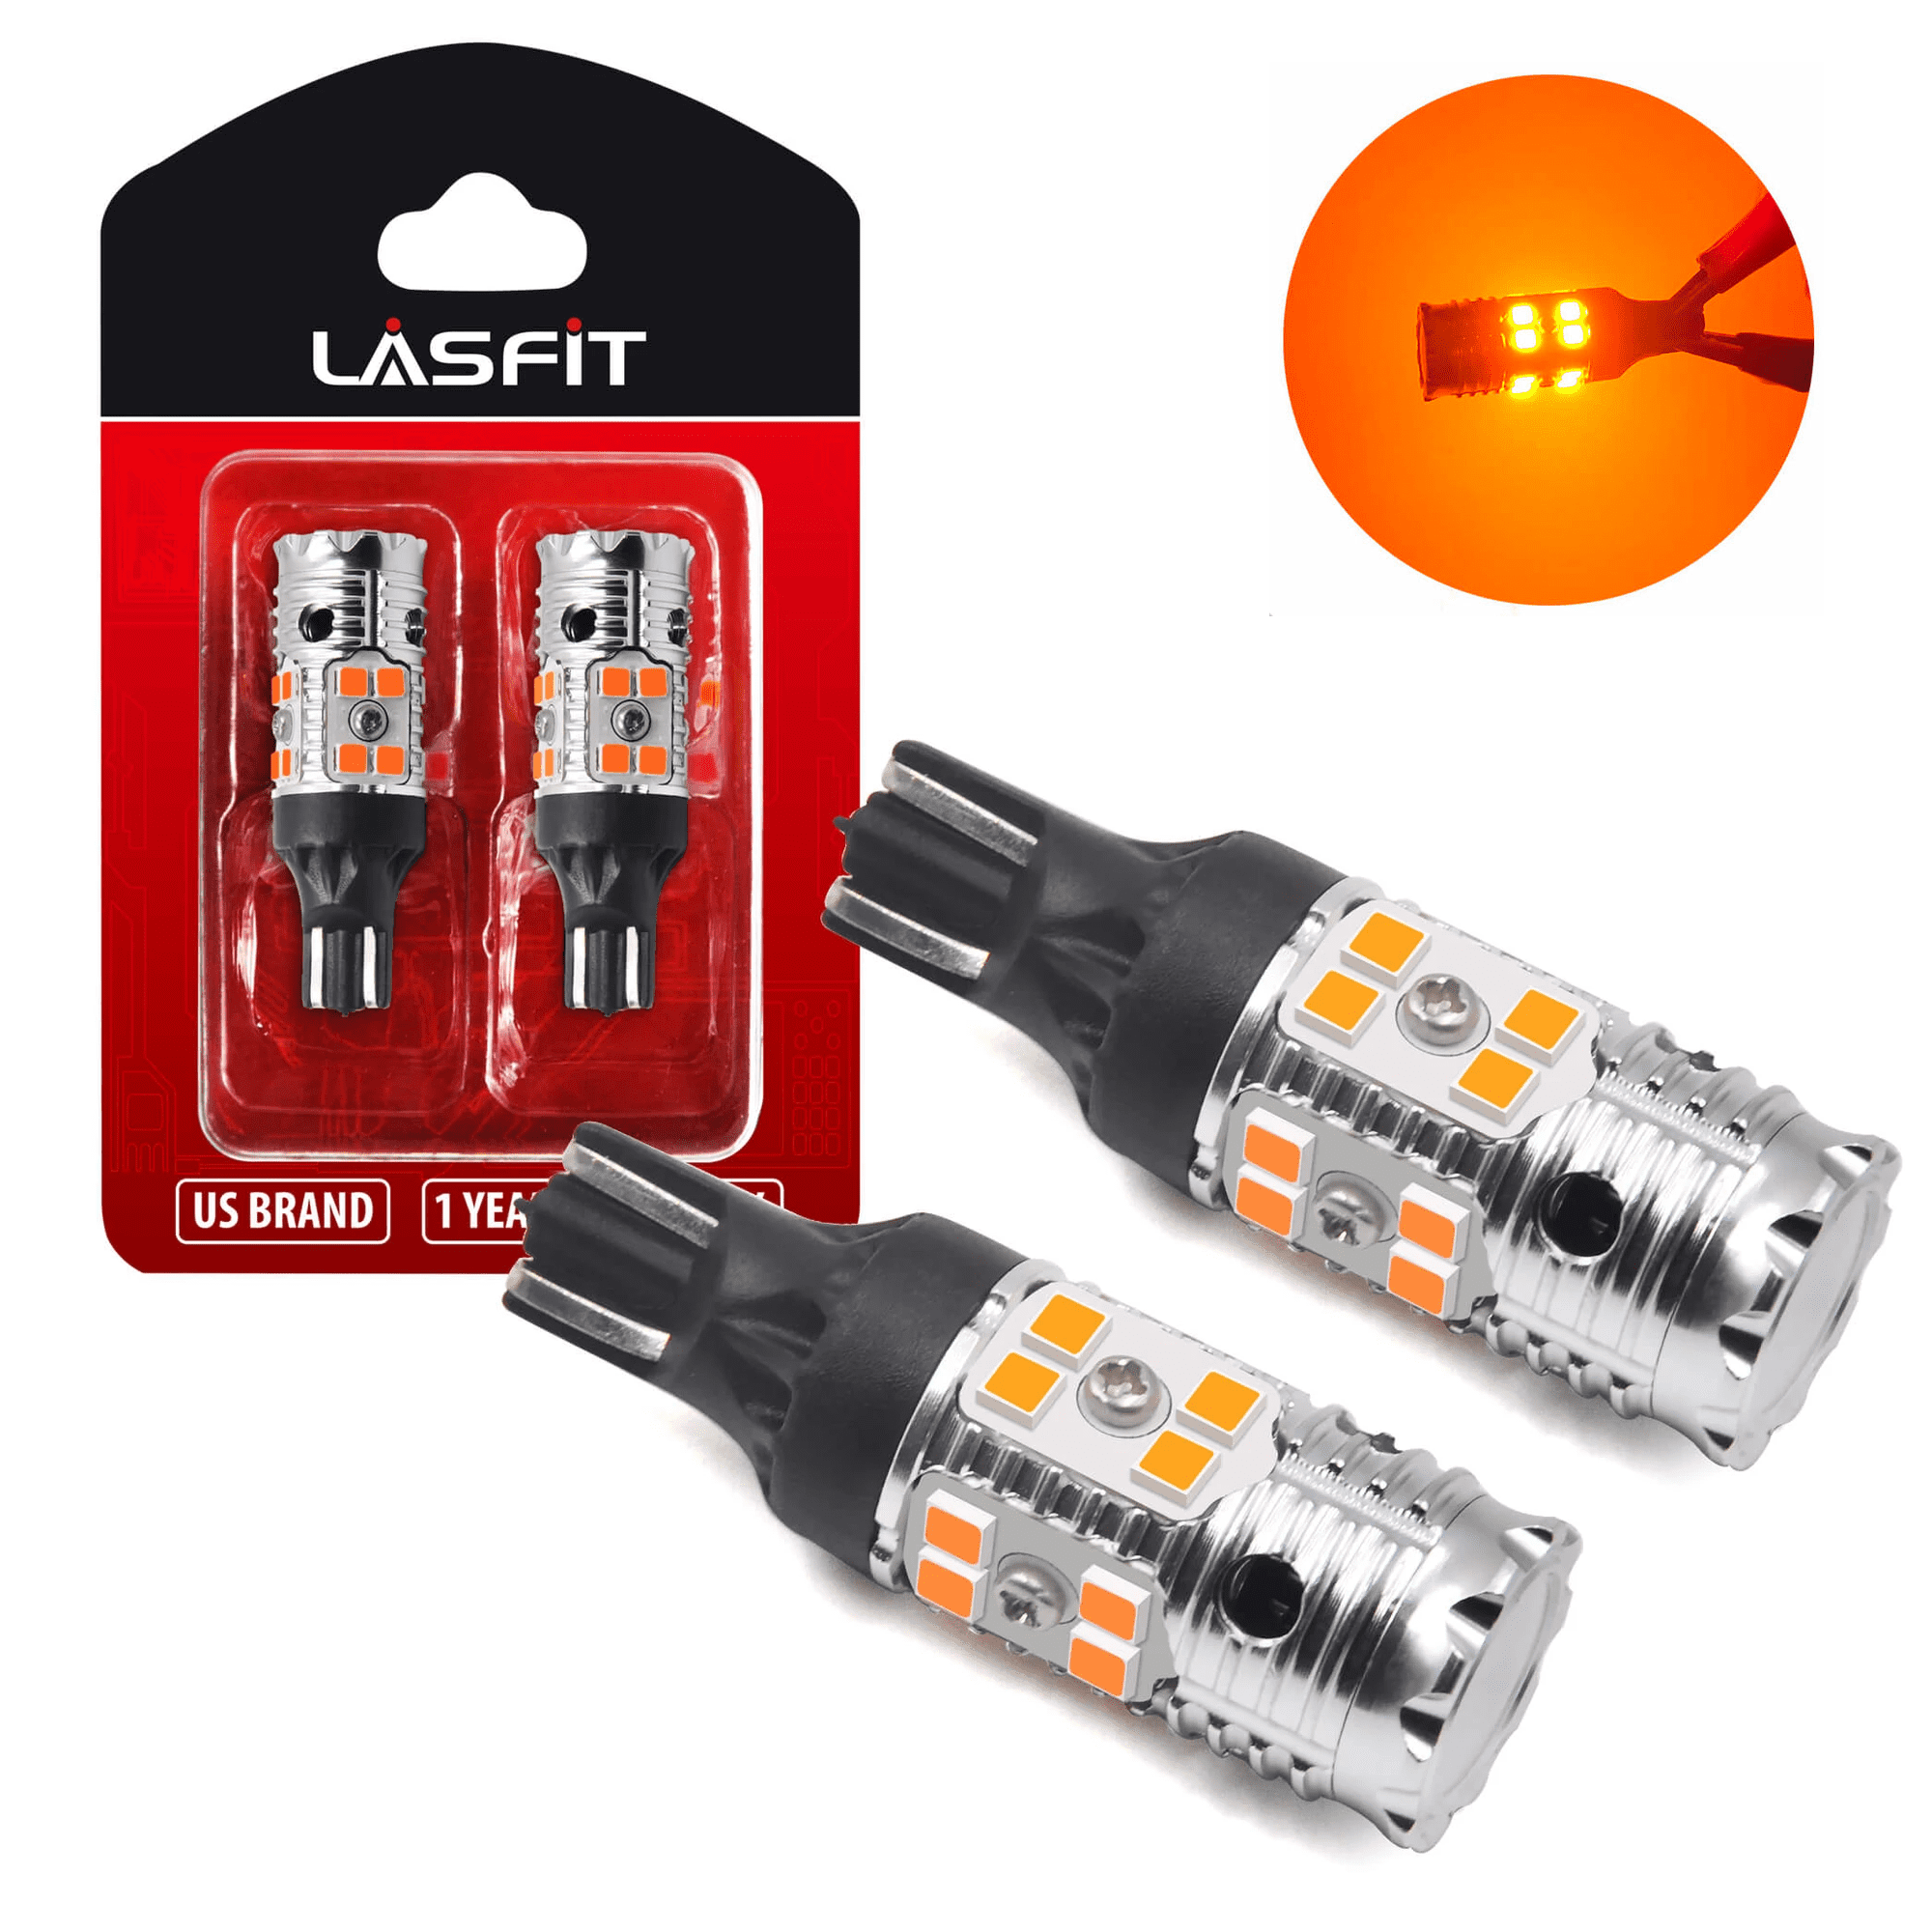 PA 2x T10 T15 168 921 LED Turn Signal Lights CANBUS No Error canceller kit with Wiring Adapter Load Resistor 